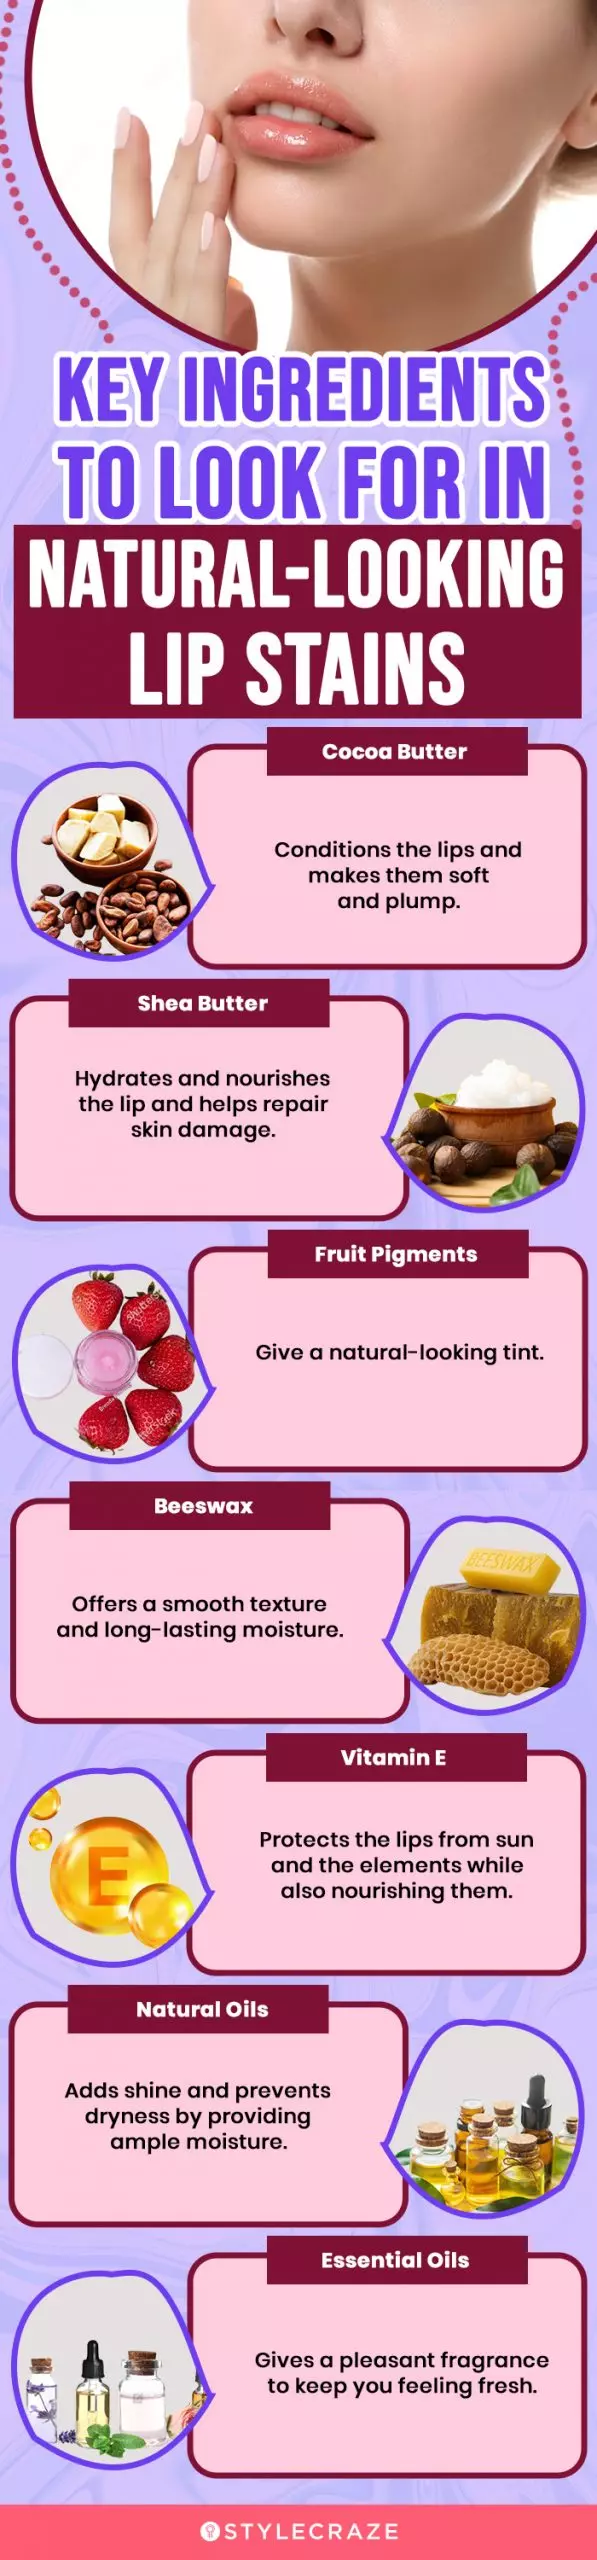 Key Ingredients To Look For In Natural-Looking Lip Stains (infographic)